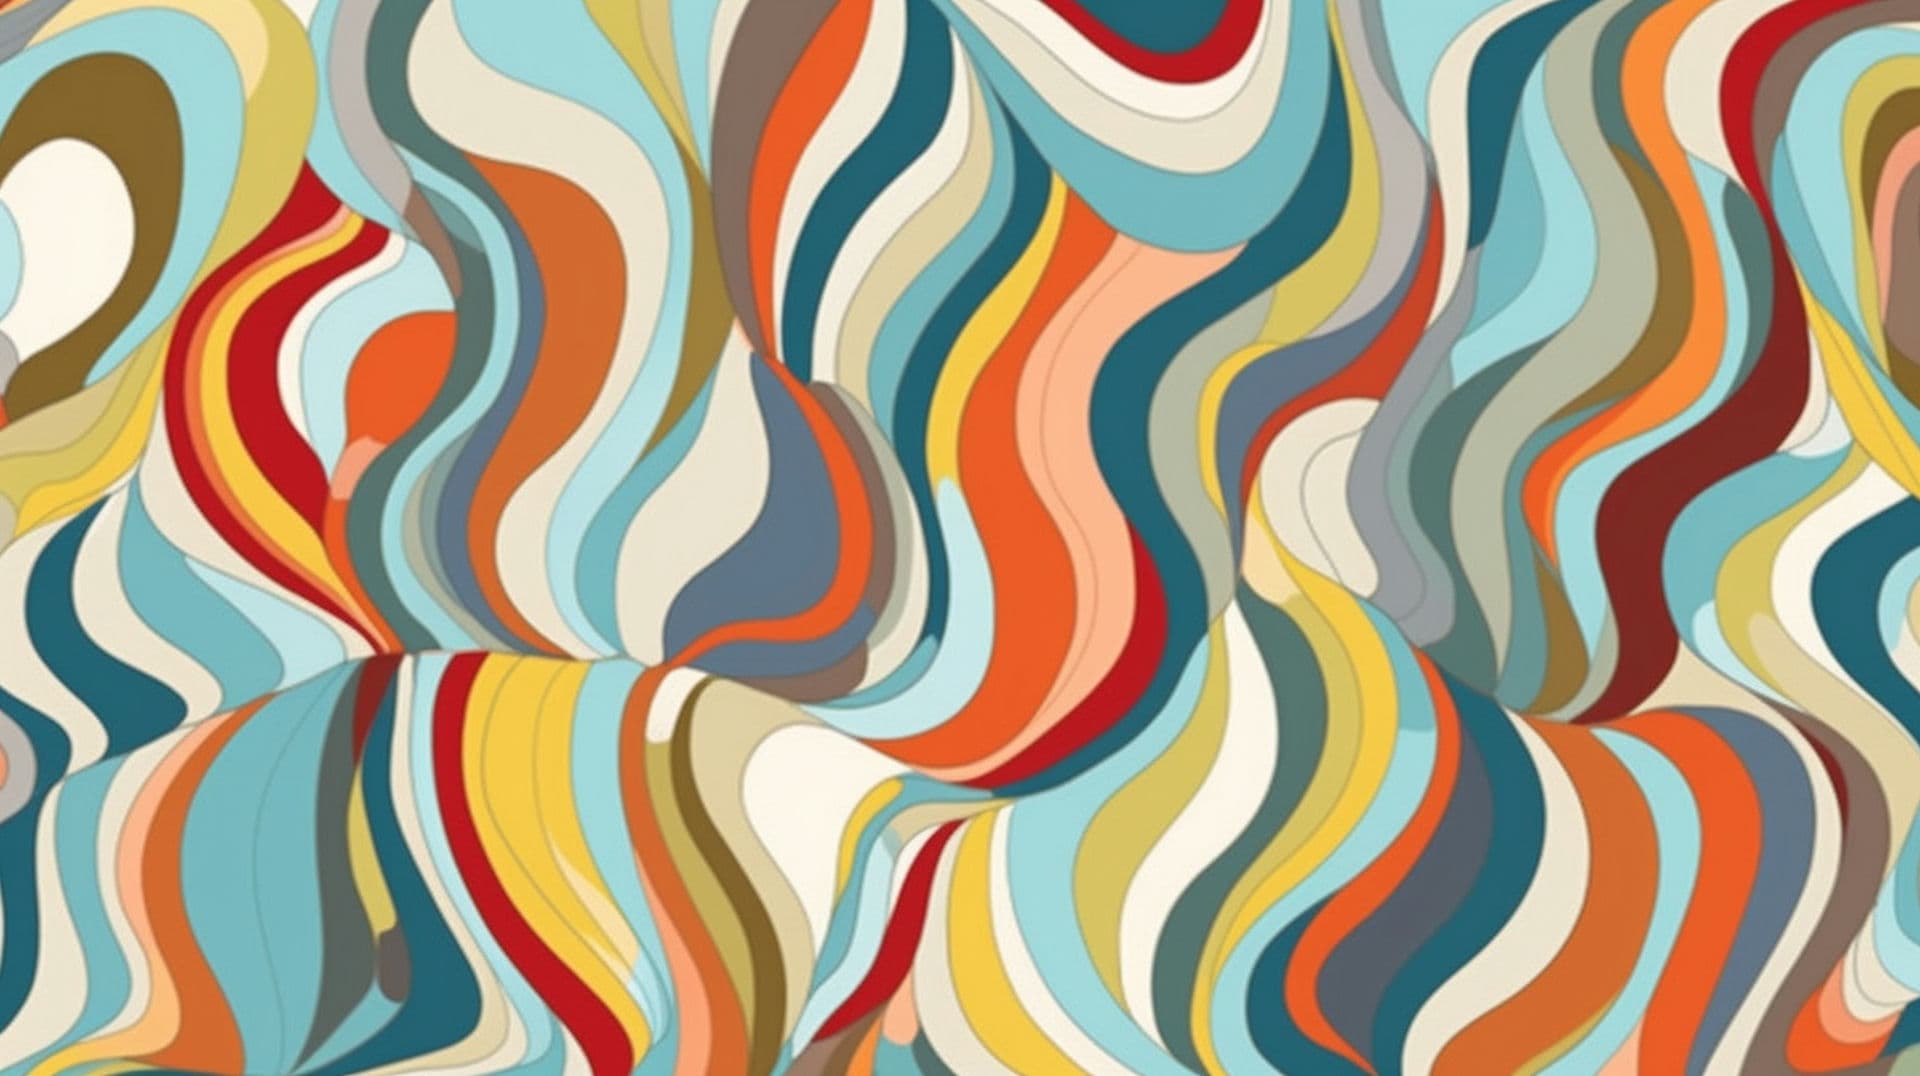 A colorful abstract art with wavy lines - Abstract